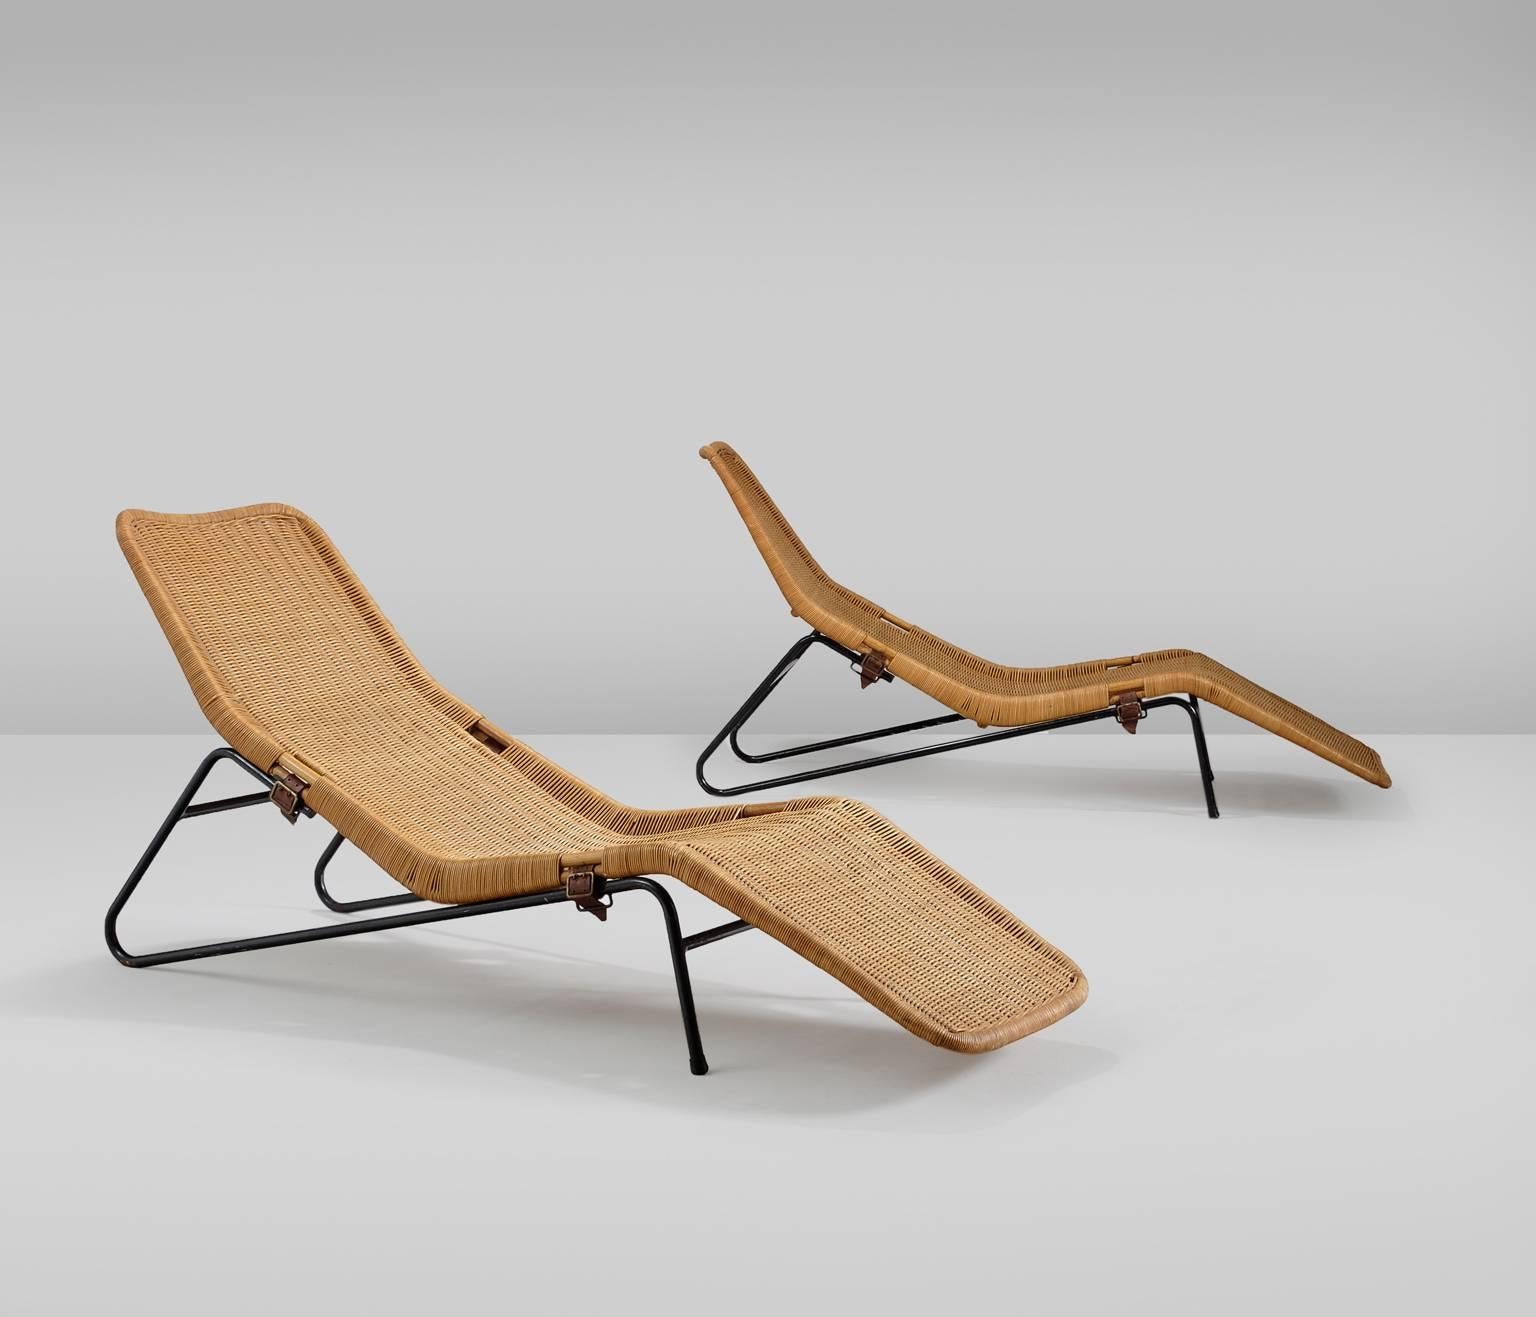 This very rare set of two lounge chairs are examples of the very high quality.

The combination of the painted steel frames with a webbing of cane (wicker) pattern makes a beautiful modernist chaise longue finished with leather belts.
The frame